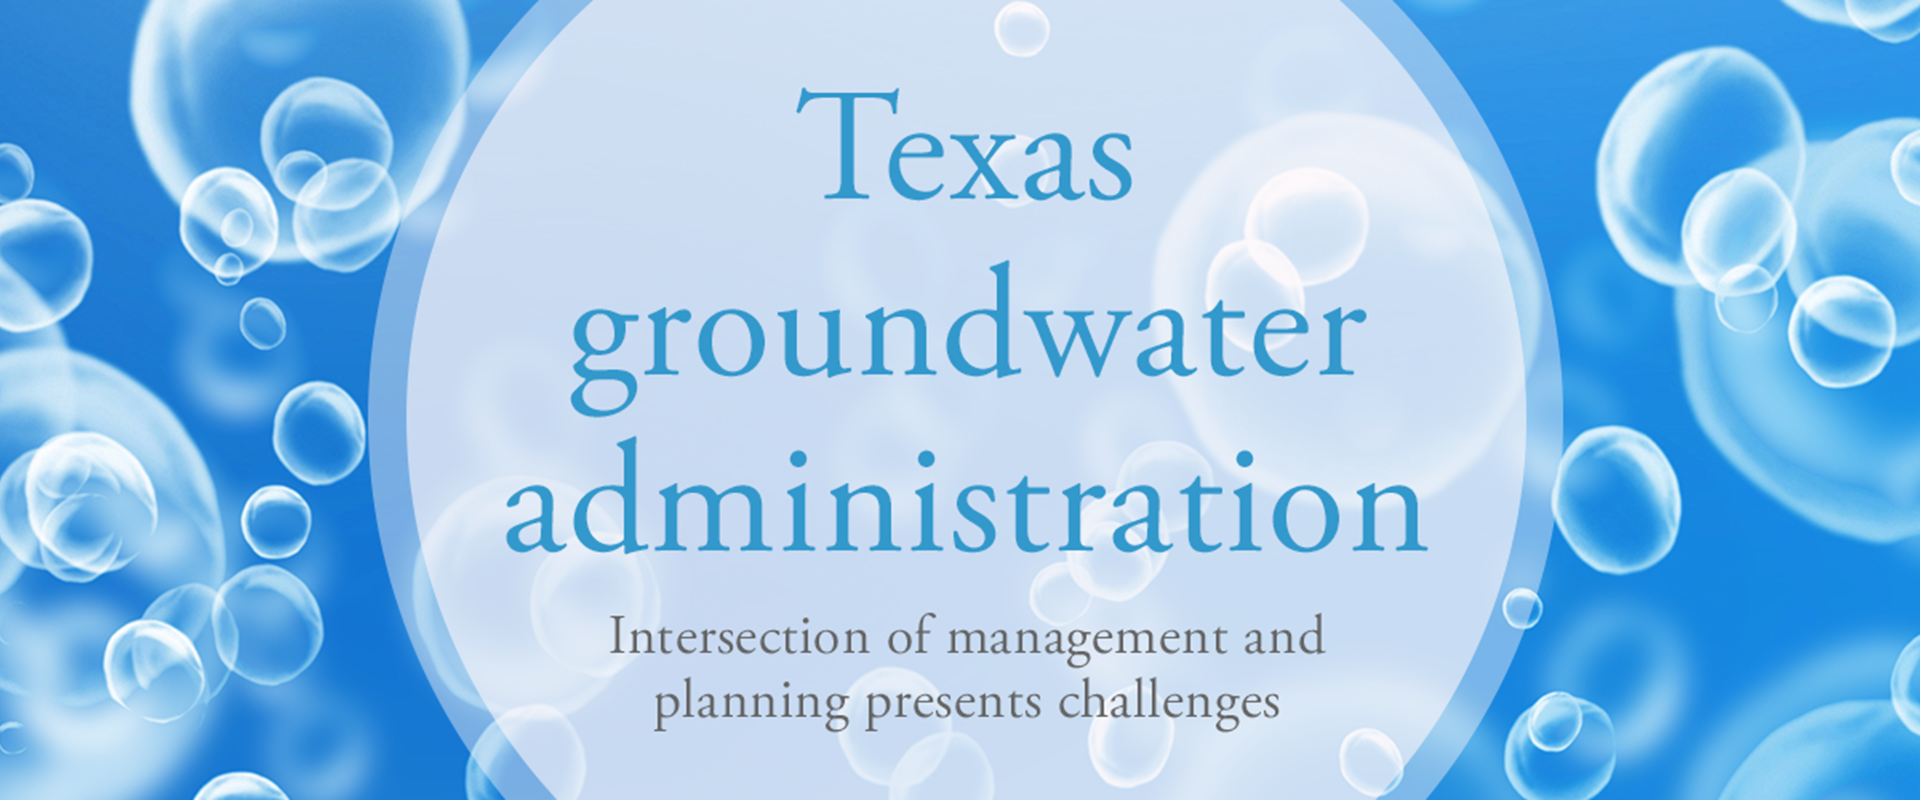 Texas groundwater administration